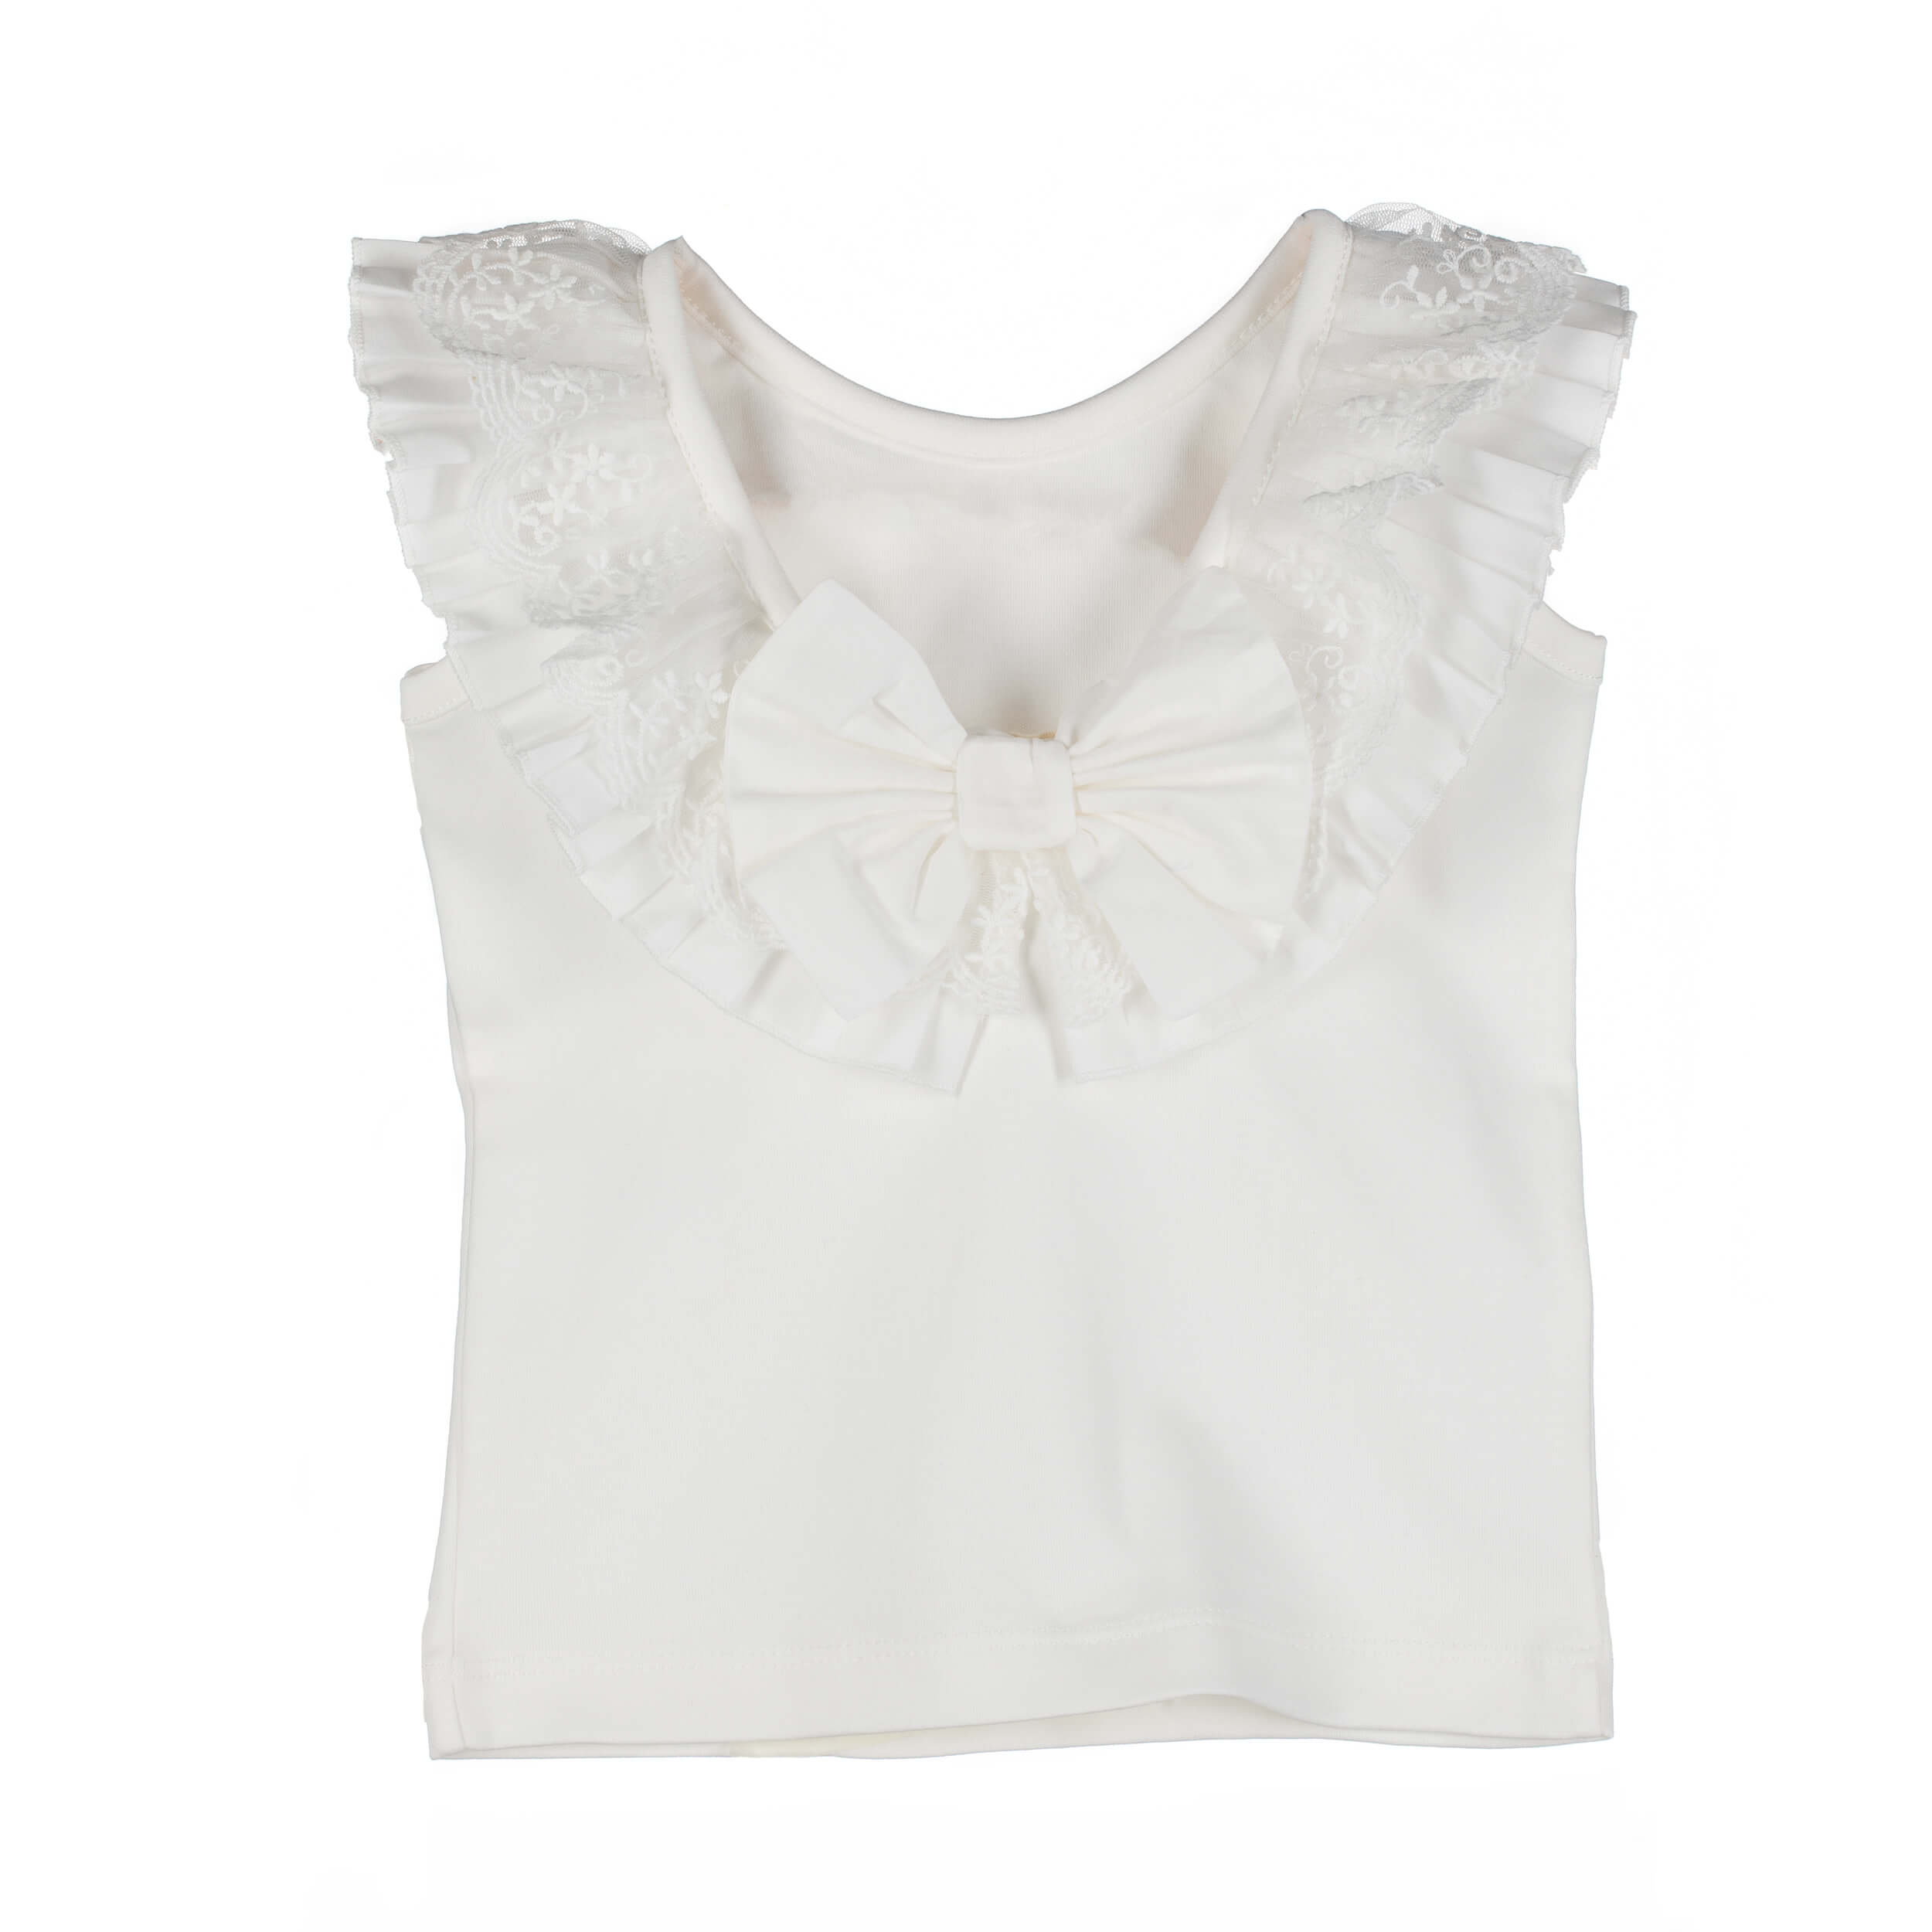 sleeveless lace frill girls top with bow